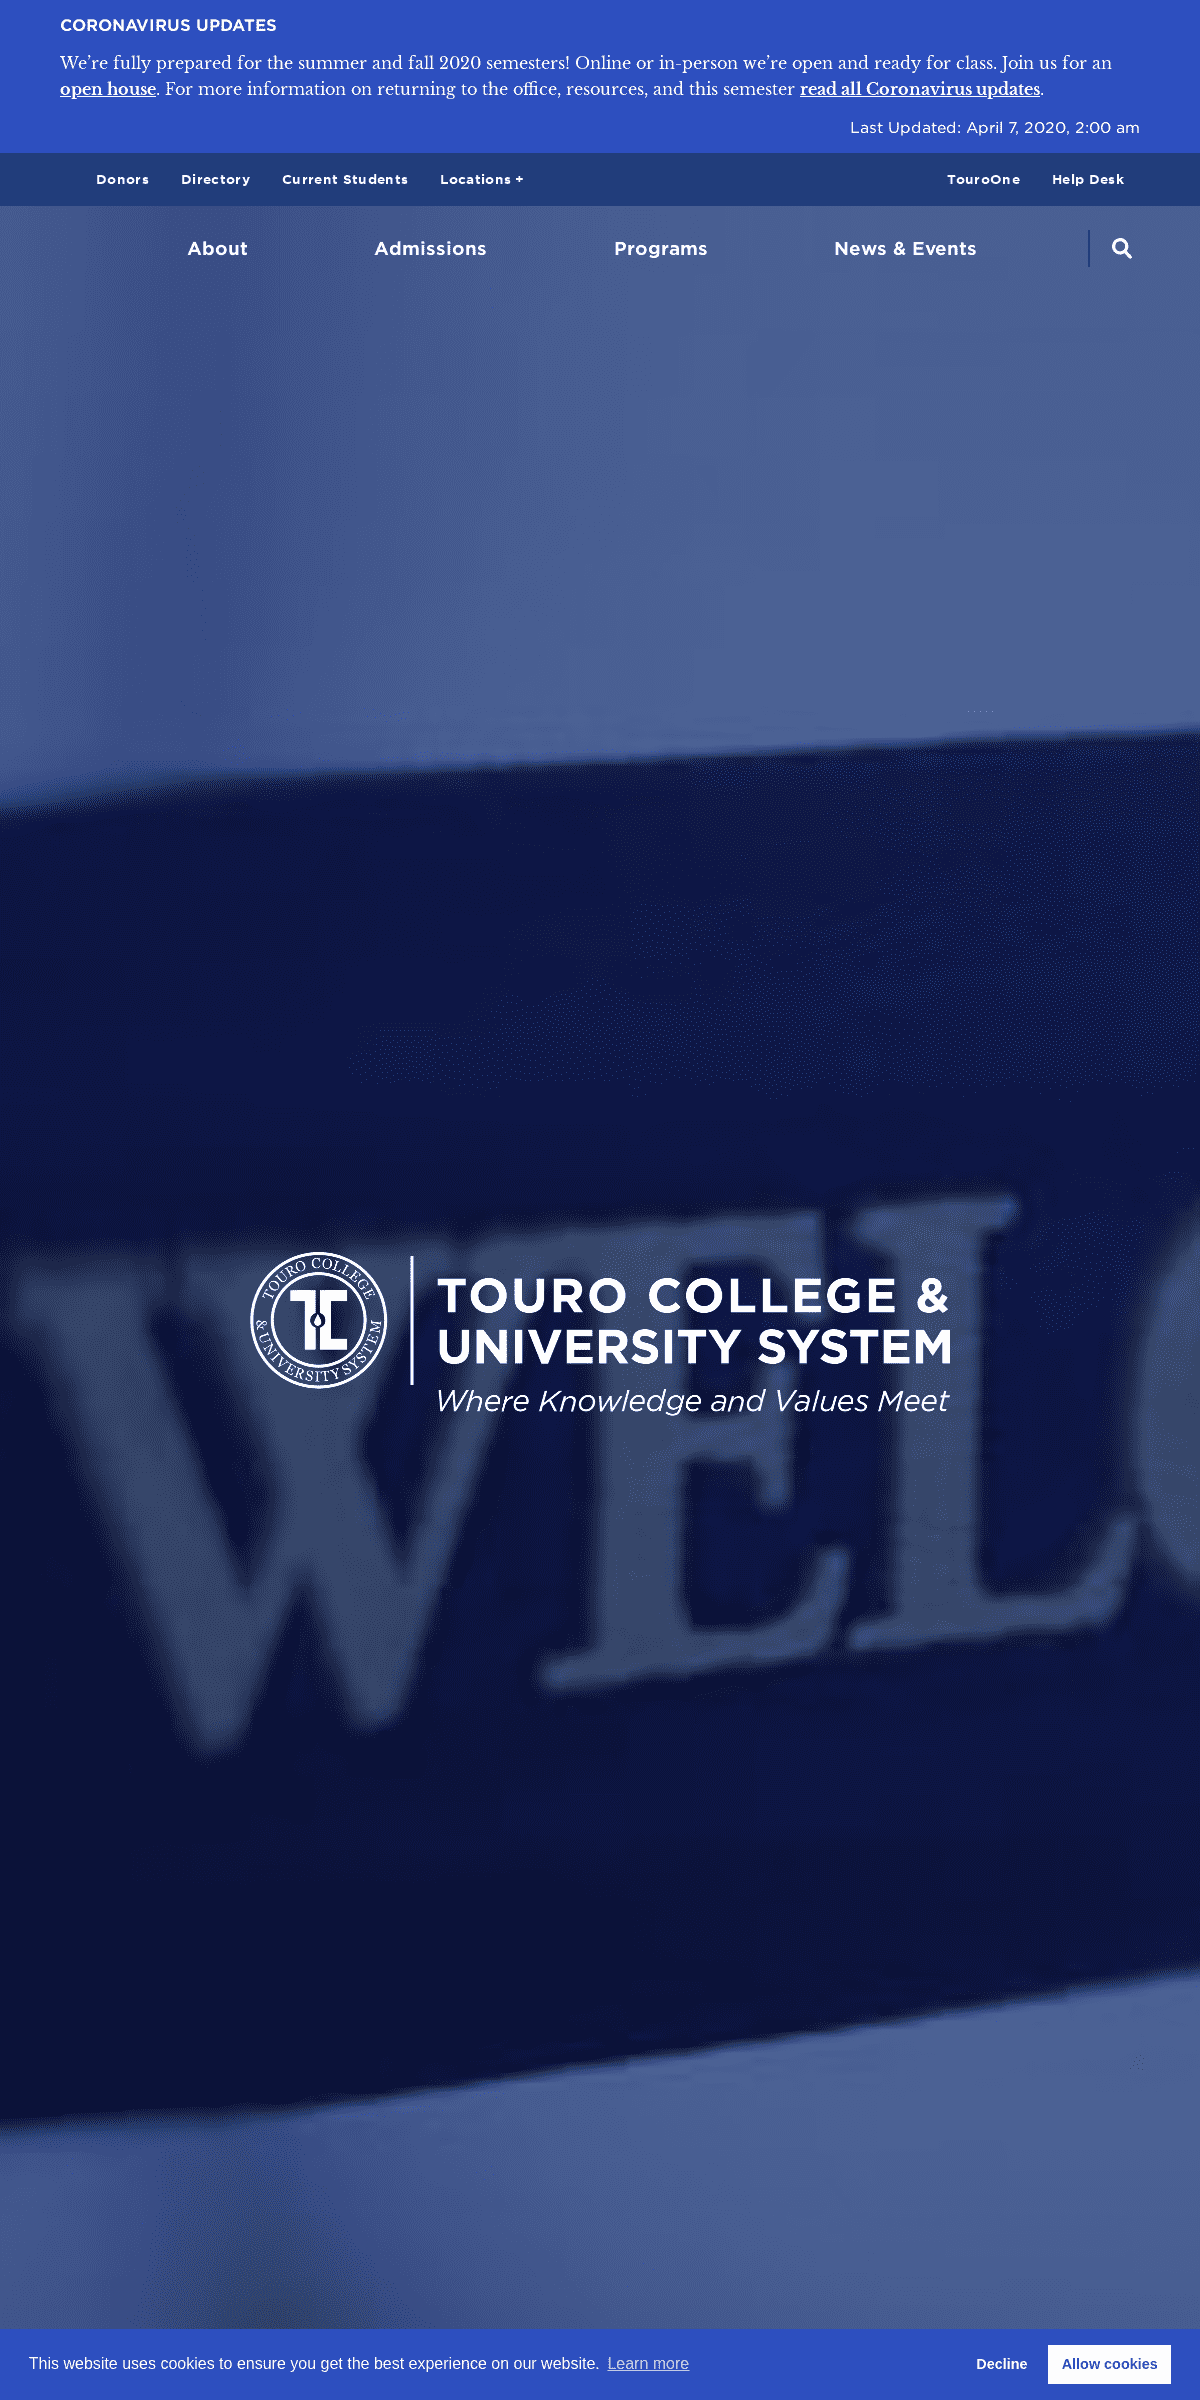 The Touro College and University System